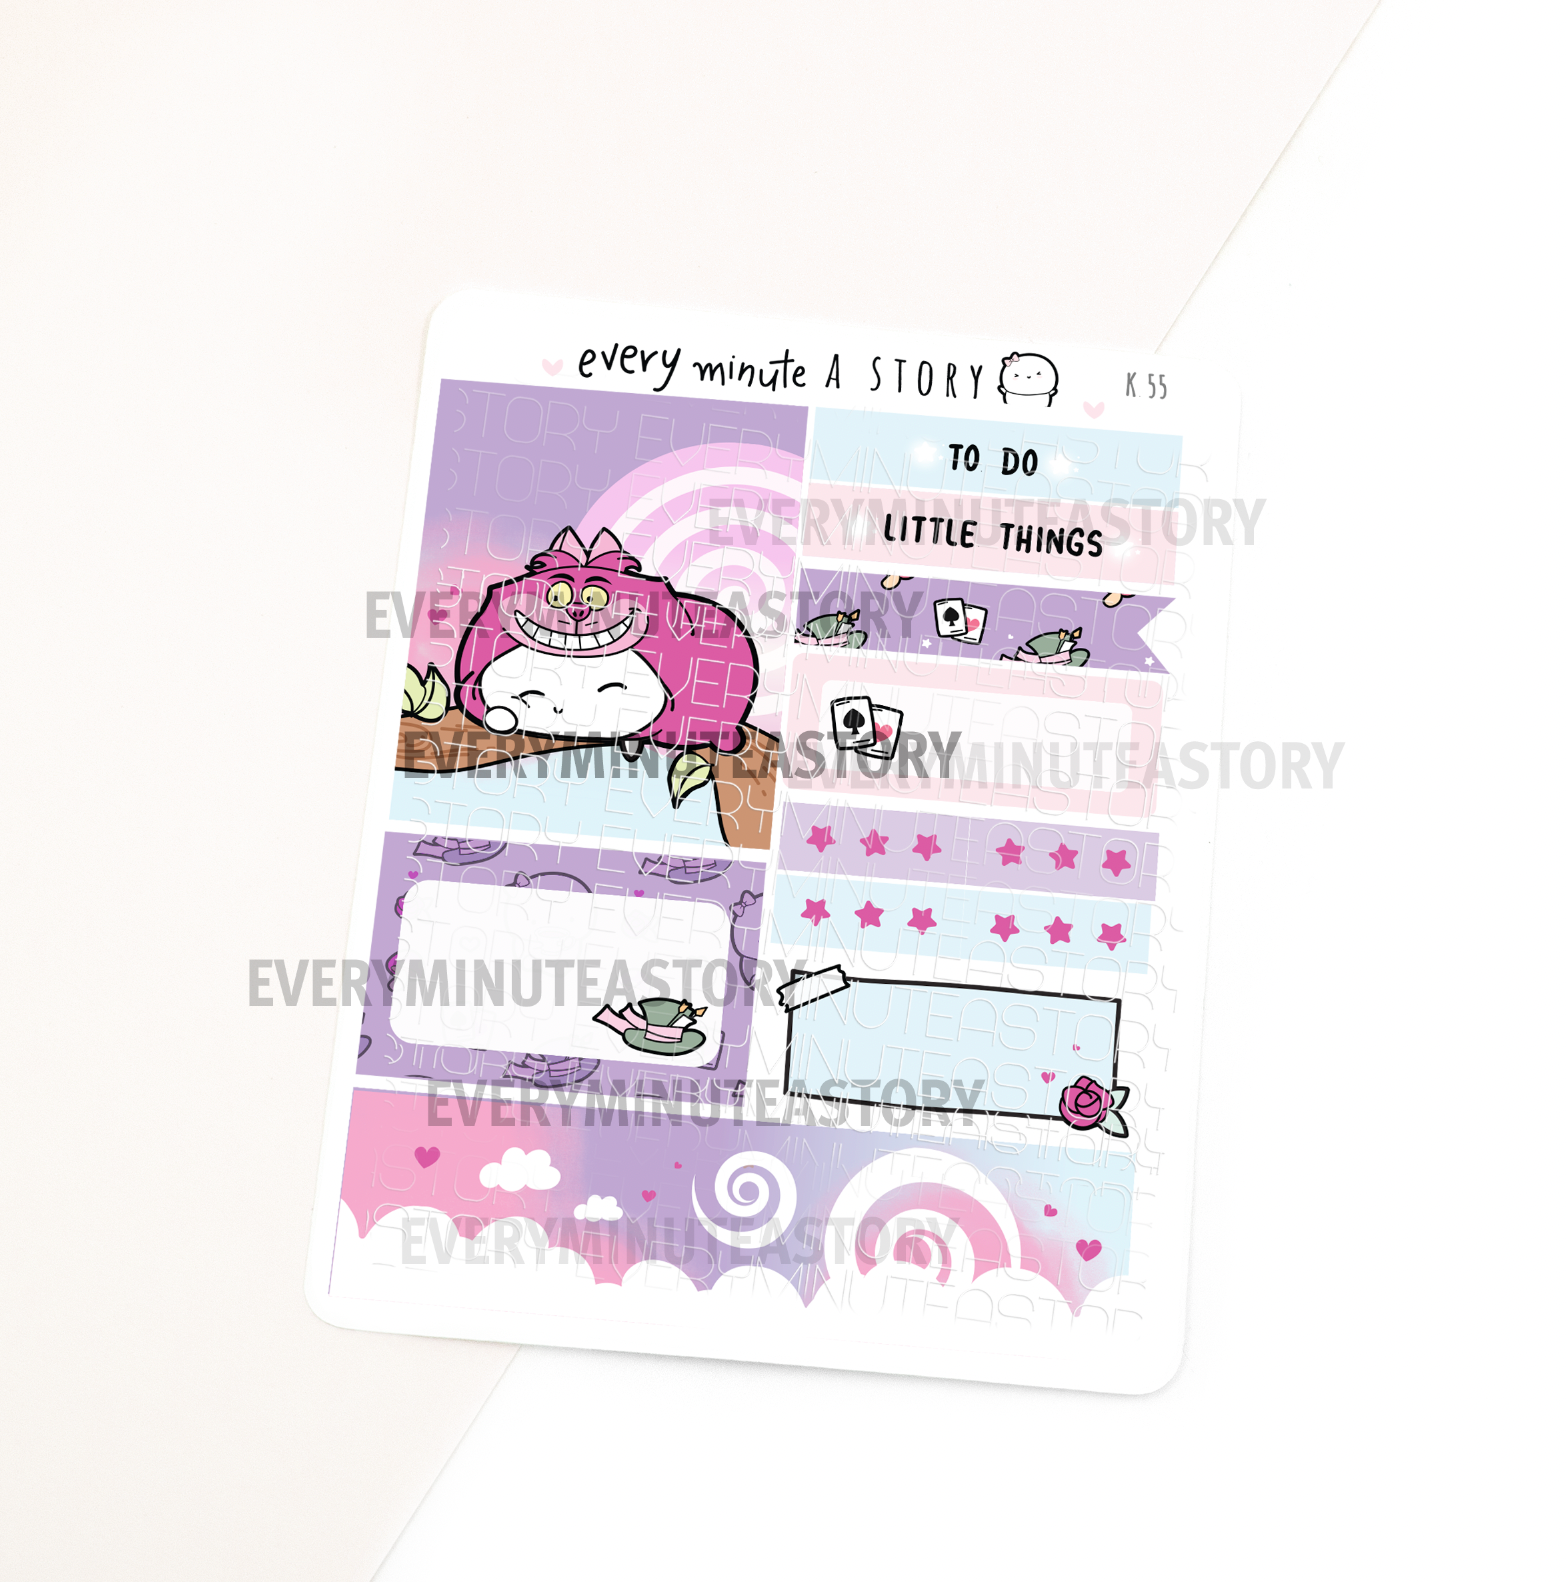 Set 11- Assorted Kyu-to Beanie Monthlies Kits, pizza, encourage-mint, travel, Cheshire cat, Giraffe themed- LOW STOCK!